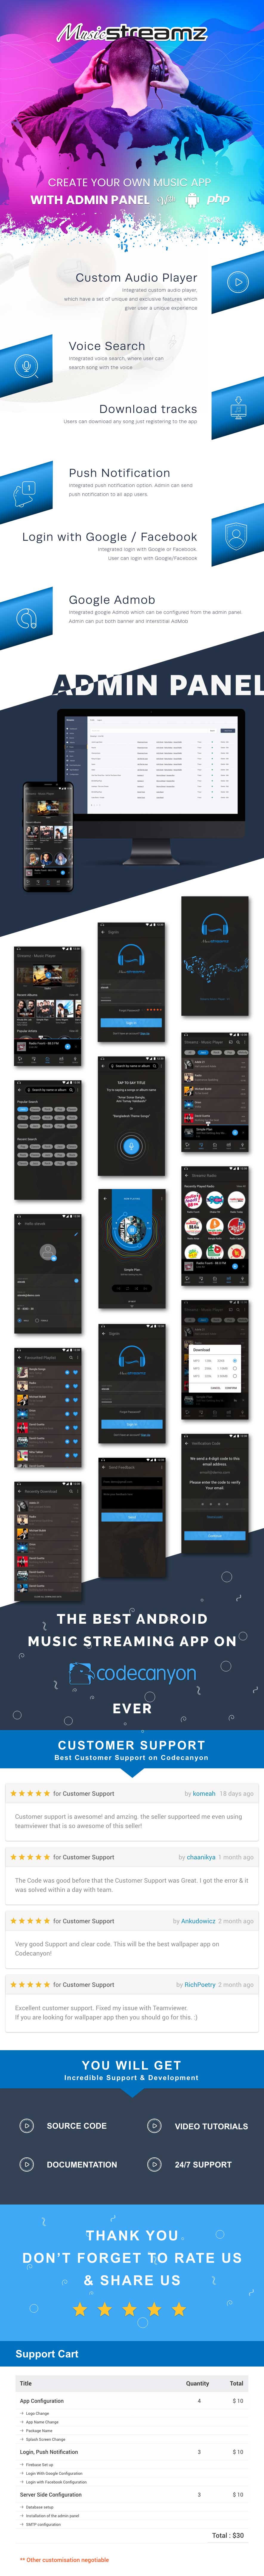 Streamz - A music streaming app with admin panel - 6